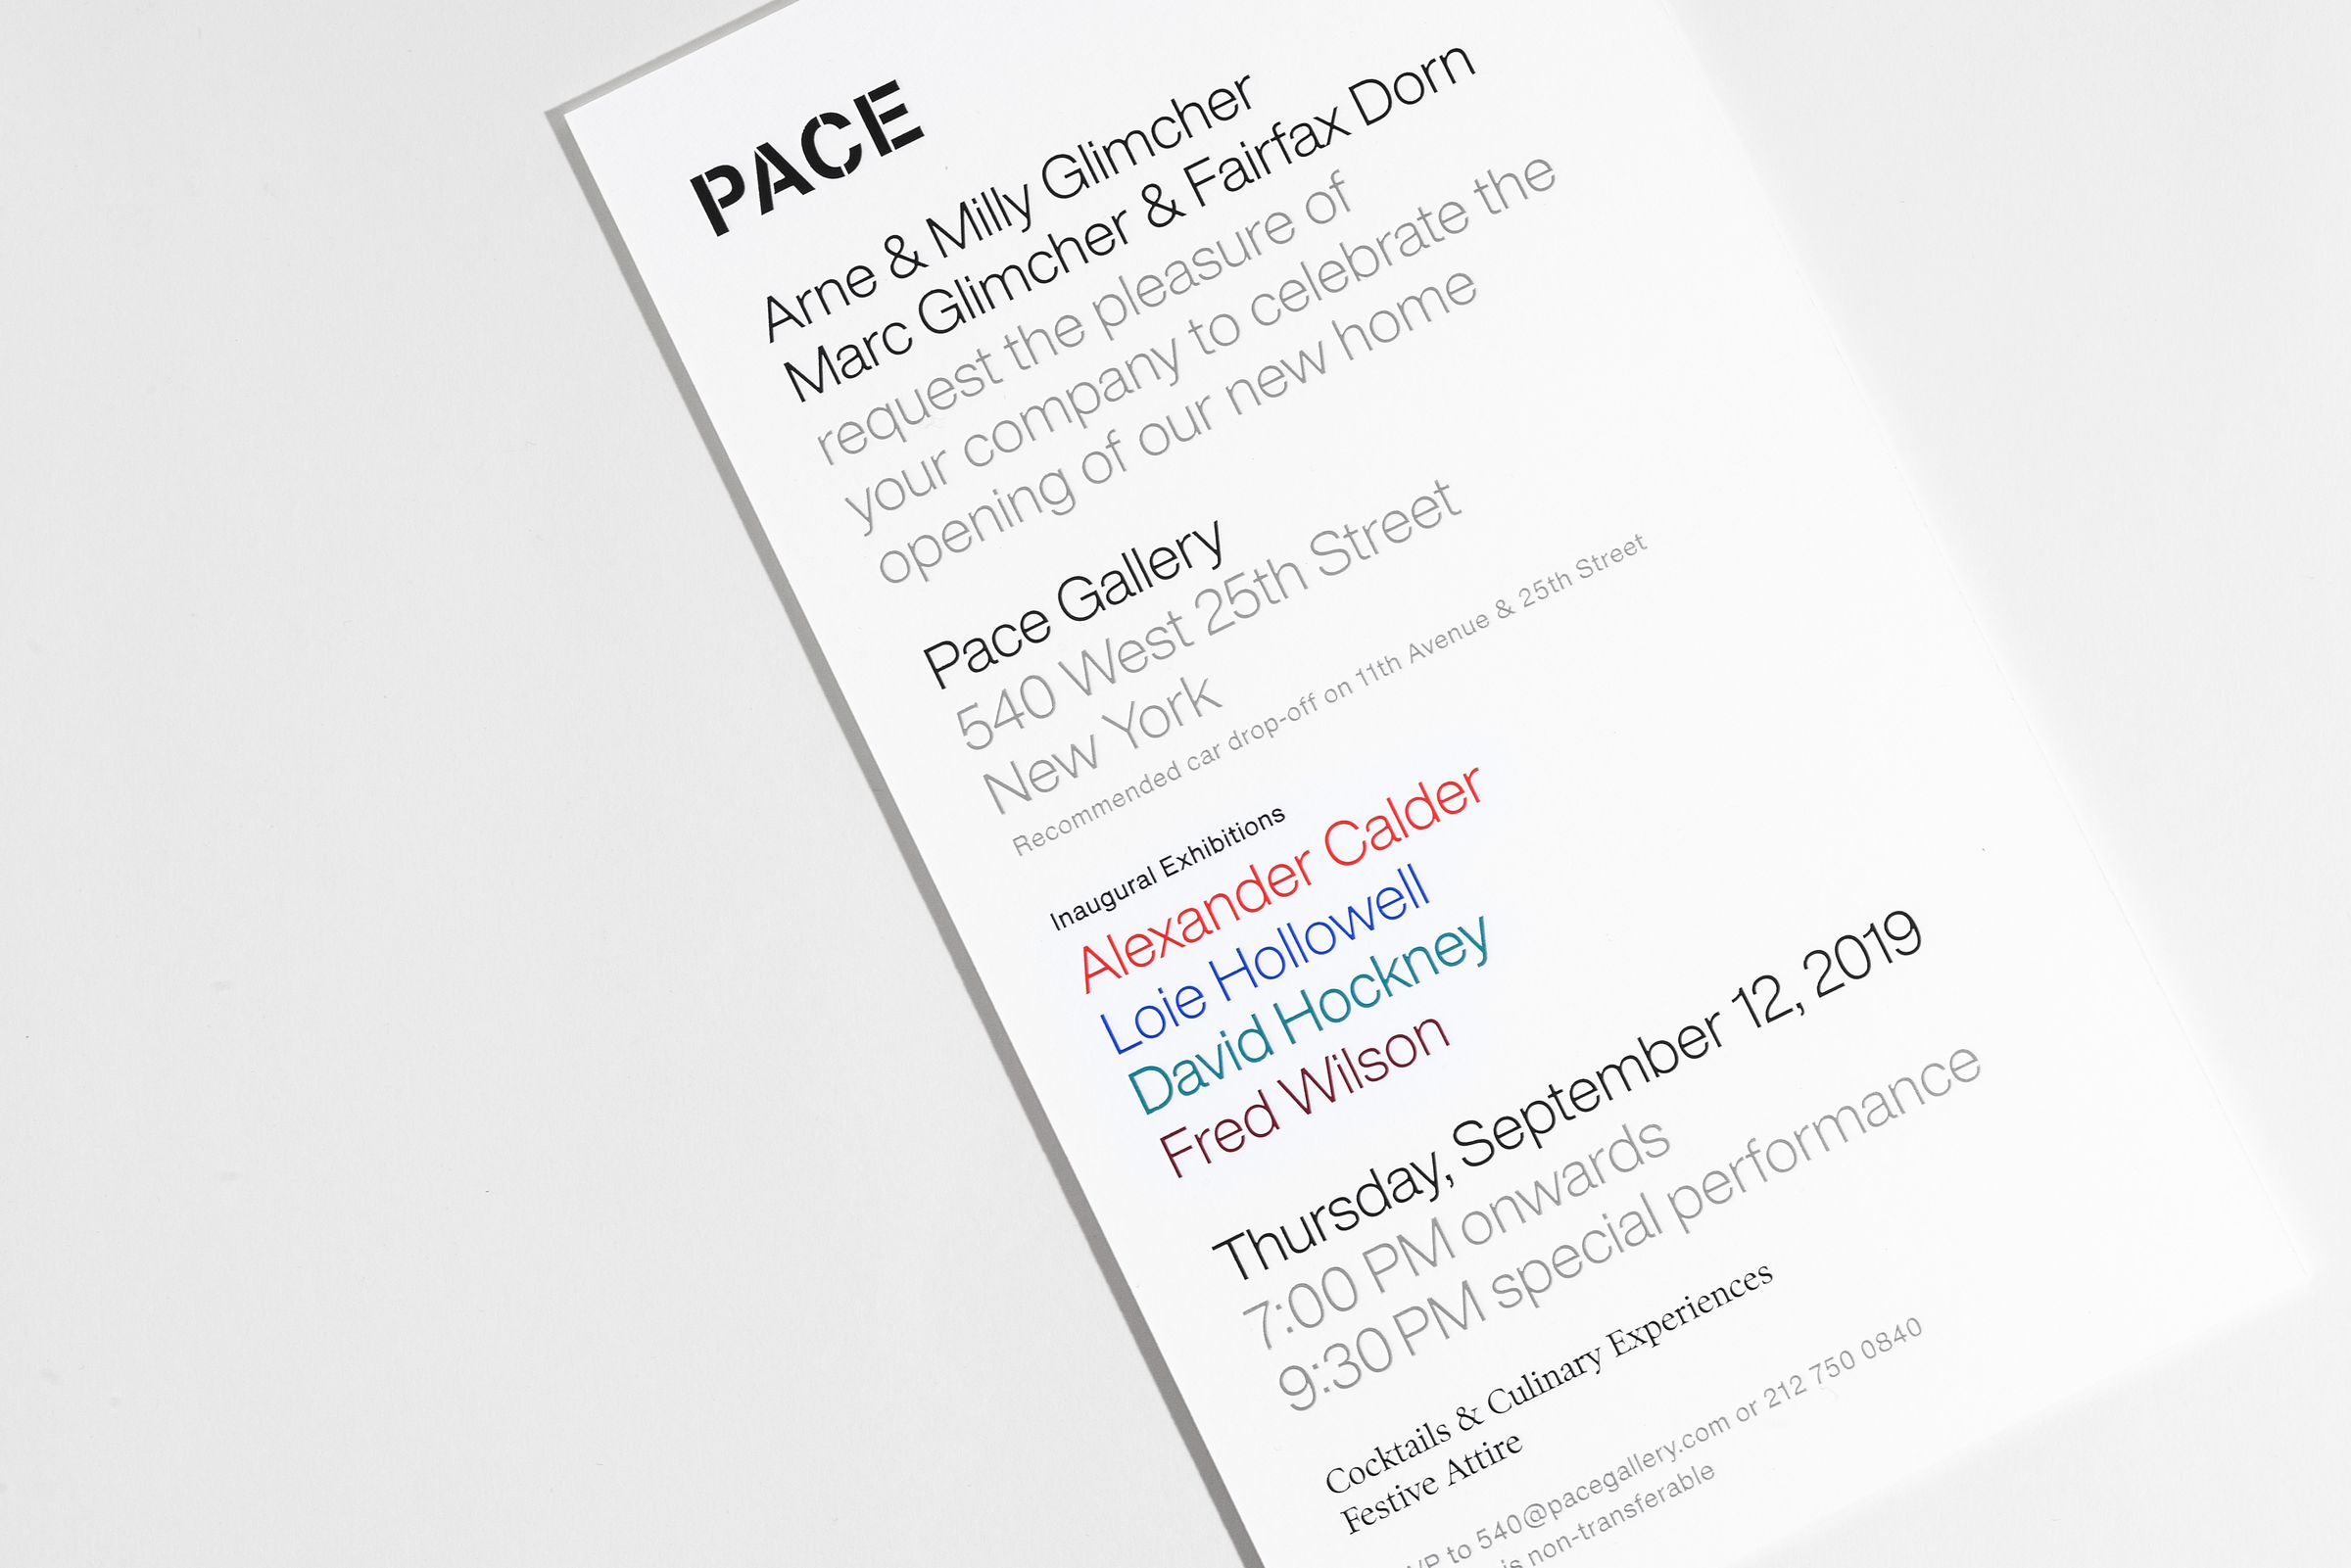 Pace Gallery lenticular invitation detail